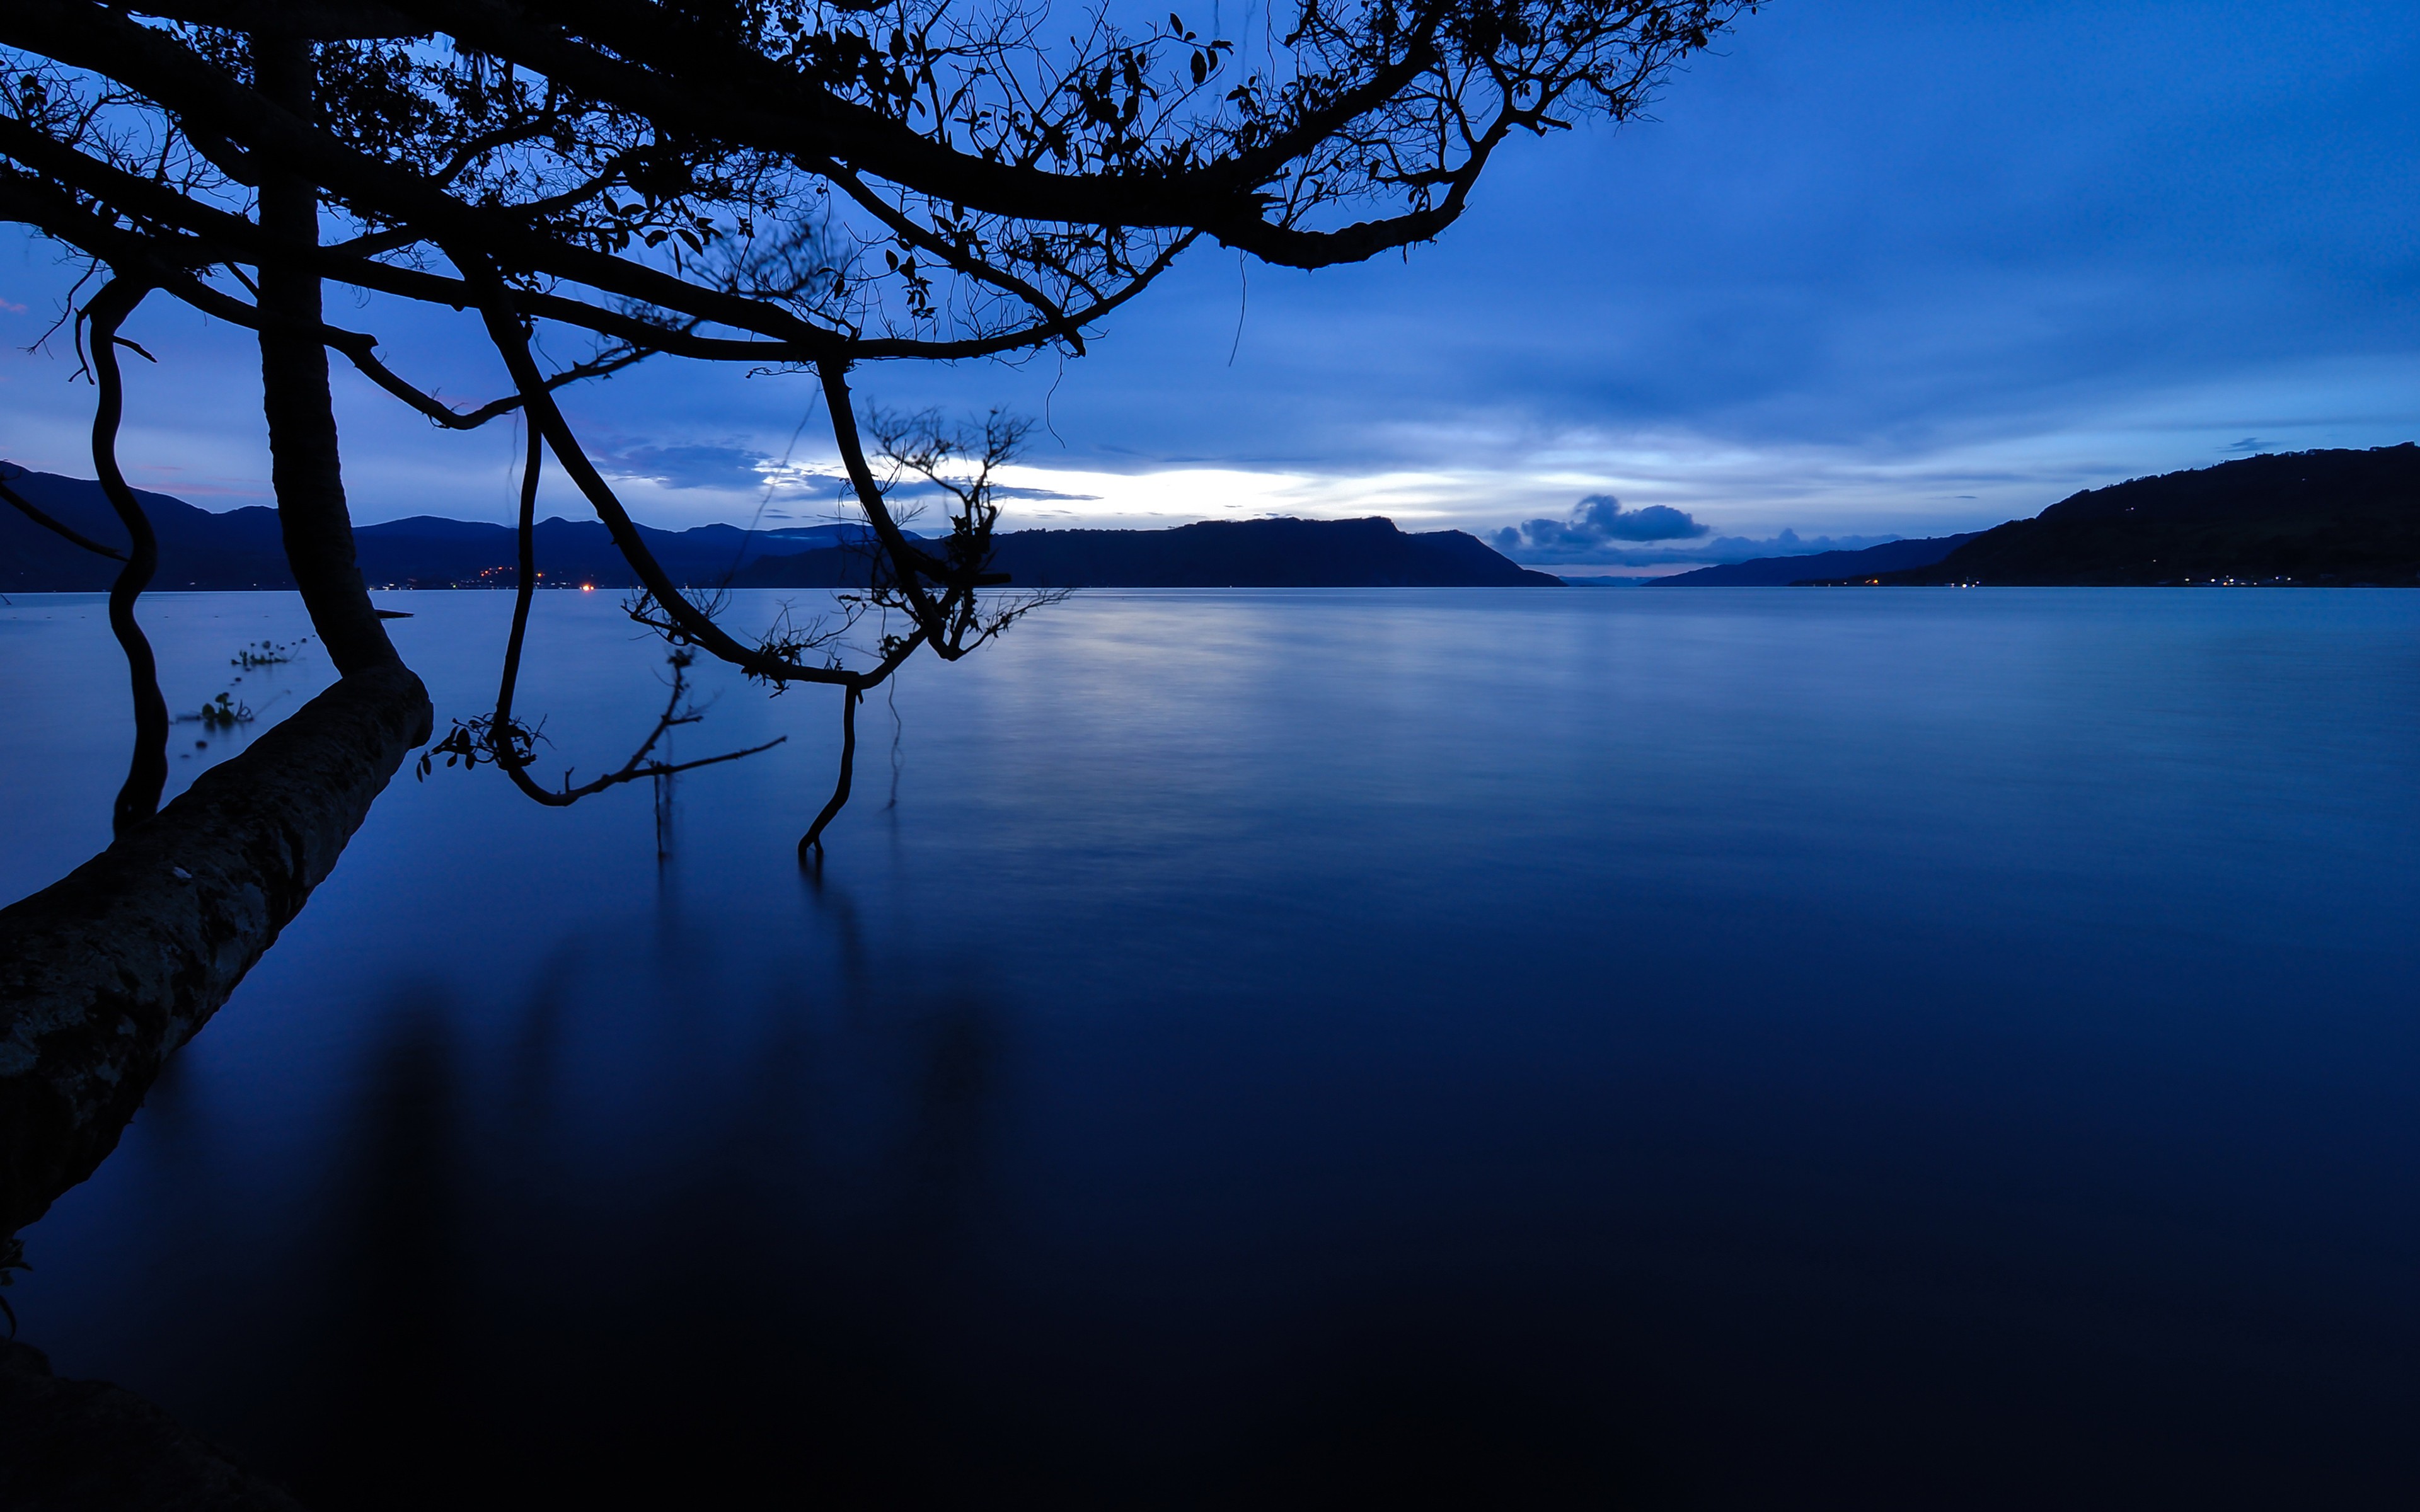 General 3840x2400 landscape nature lake hills dusk calm waters trees dark blue water outdoors